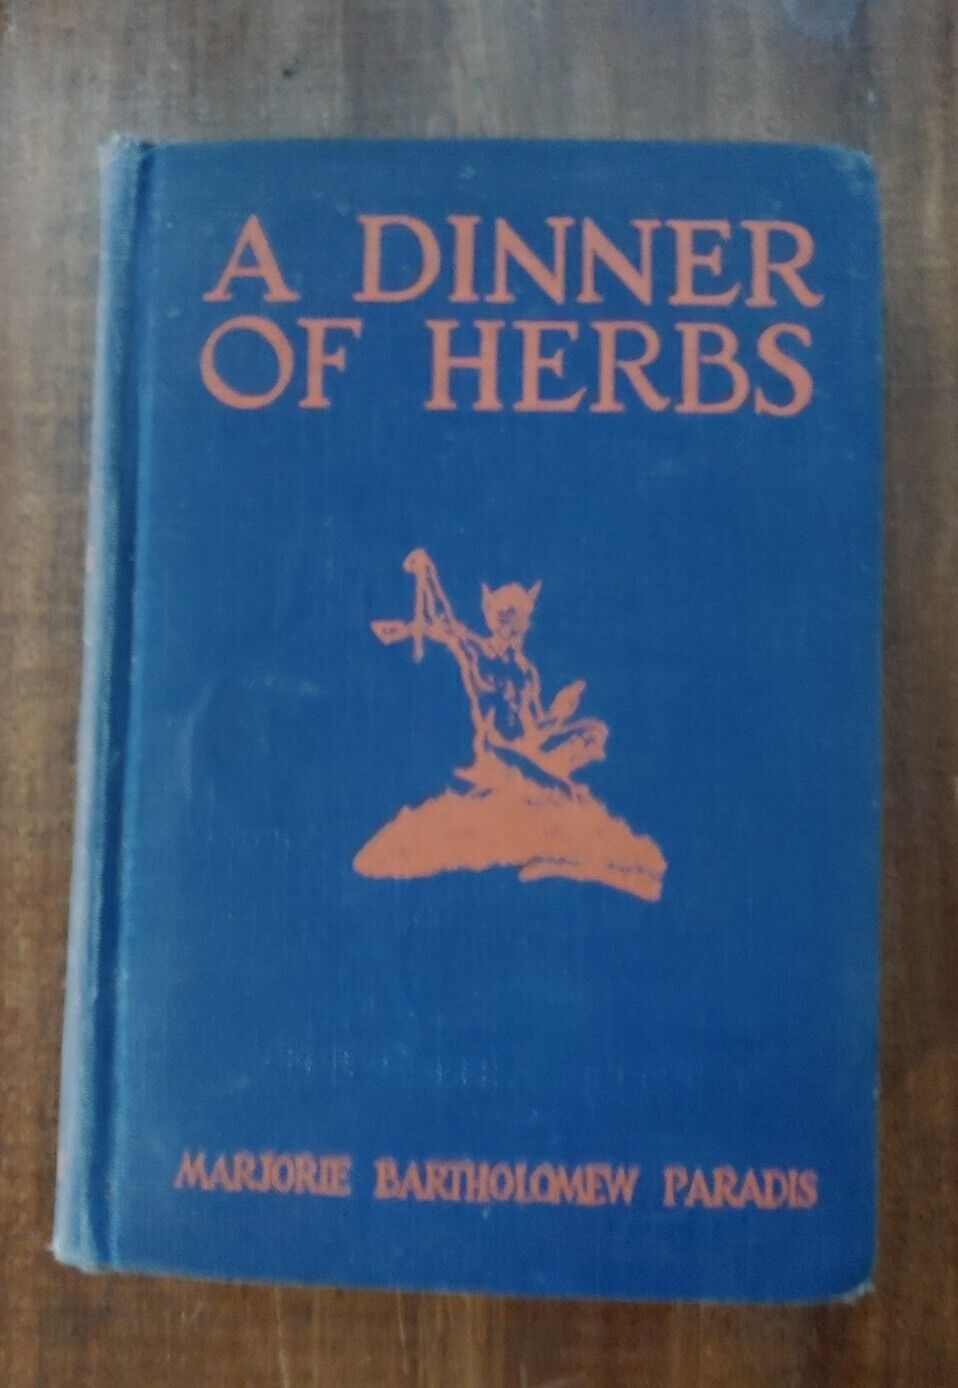 A Dinner of Herbs by Marjorie Bartholomew Paradis 1928 First Printing HC